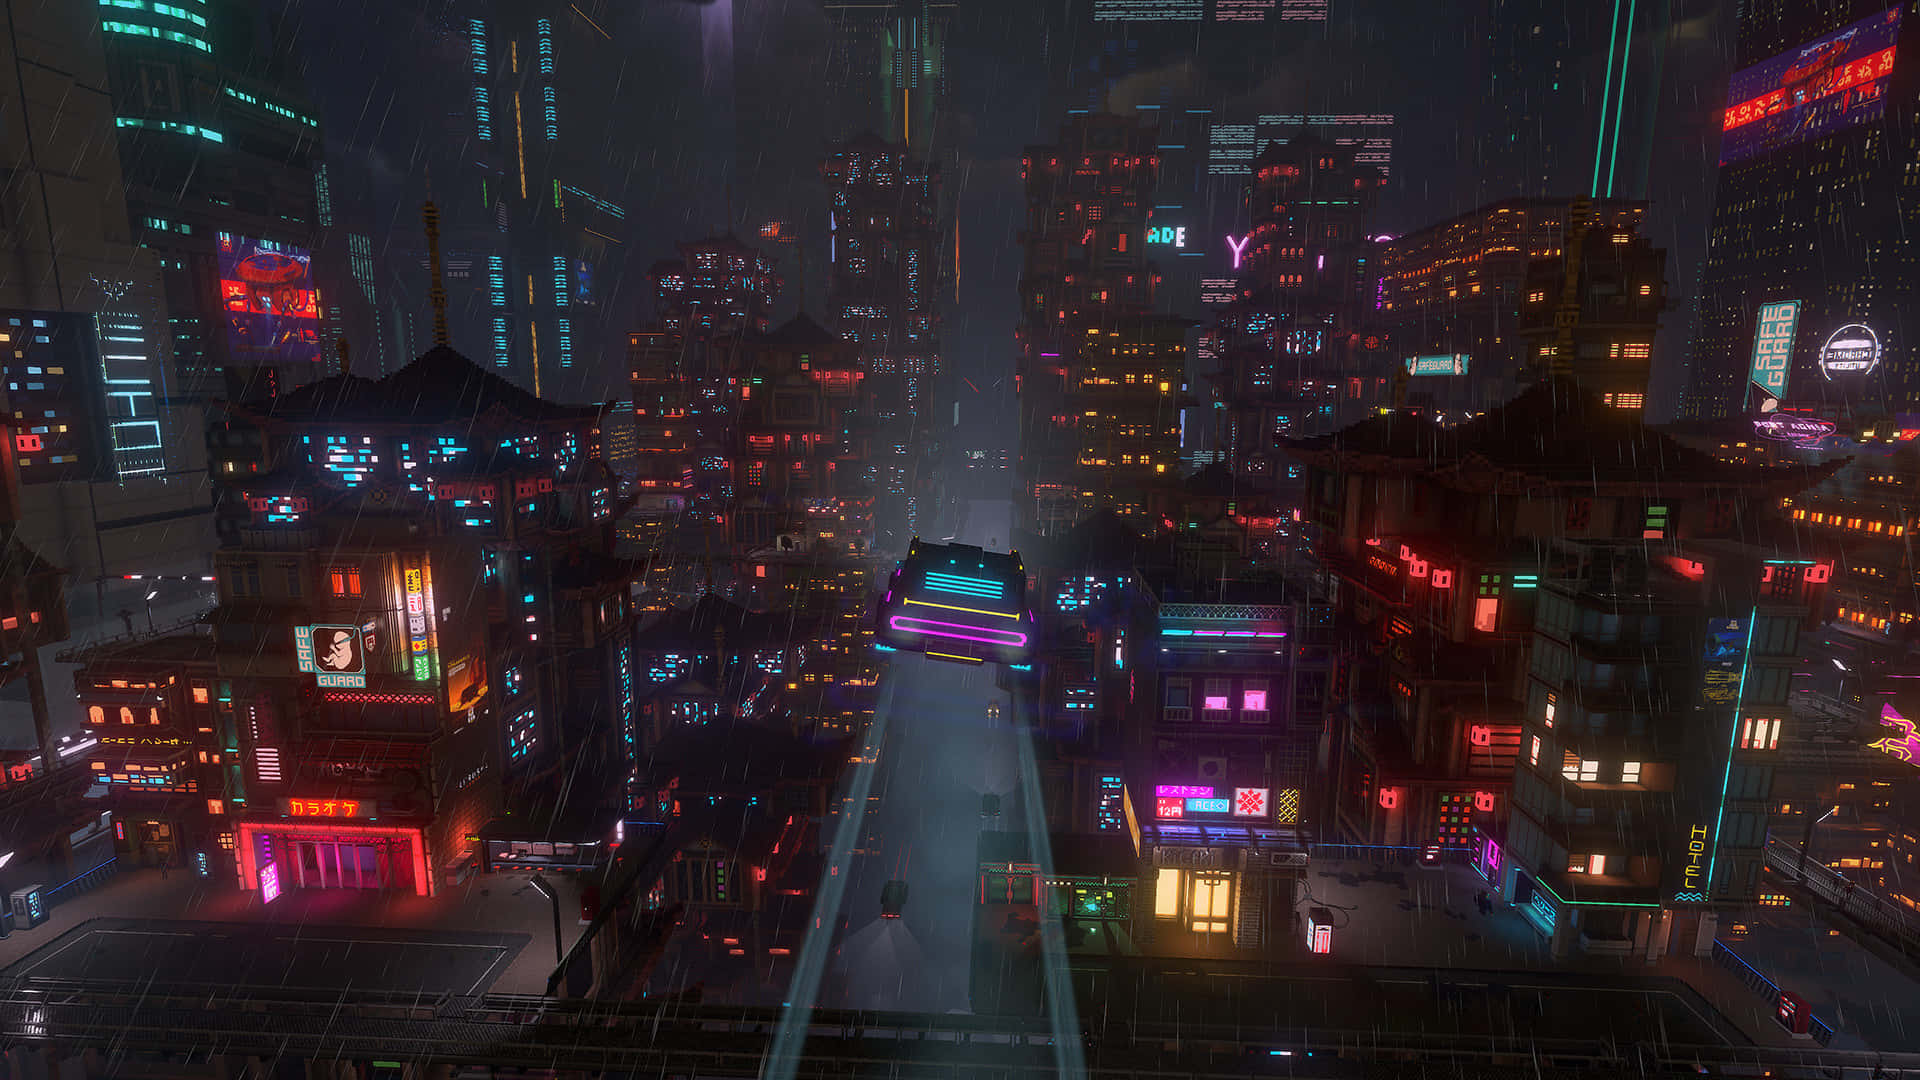 "Welcome to the Futuristic City of Night City"